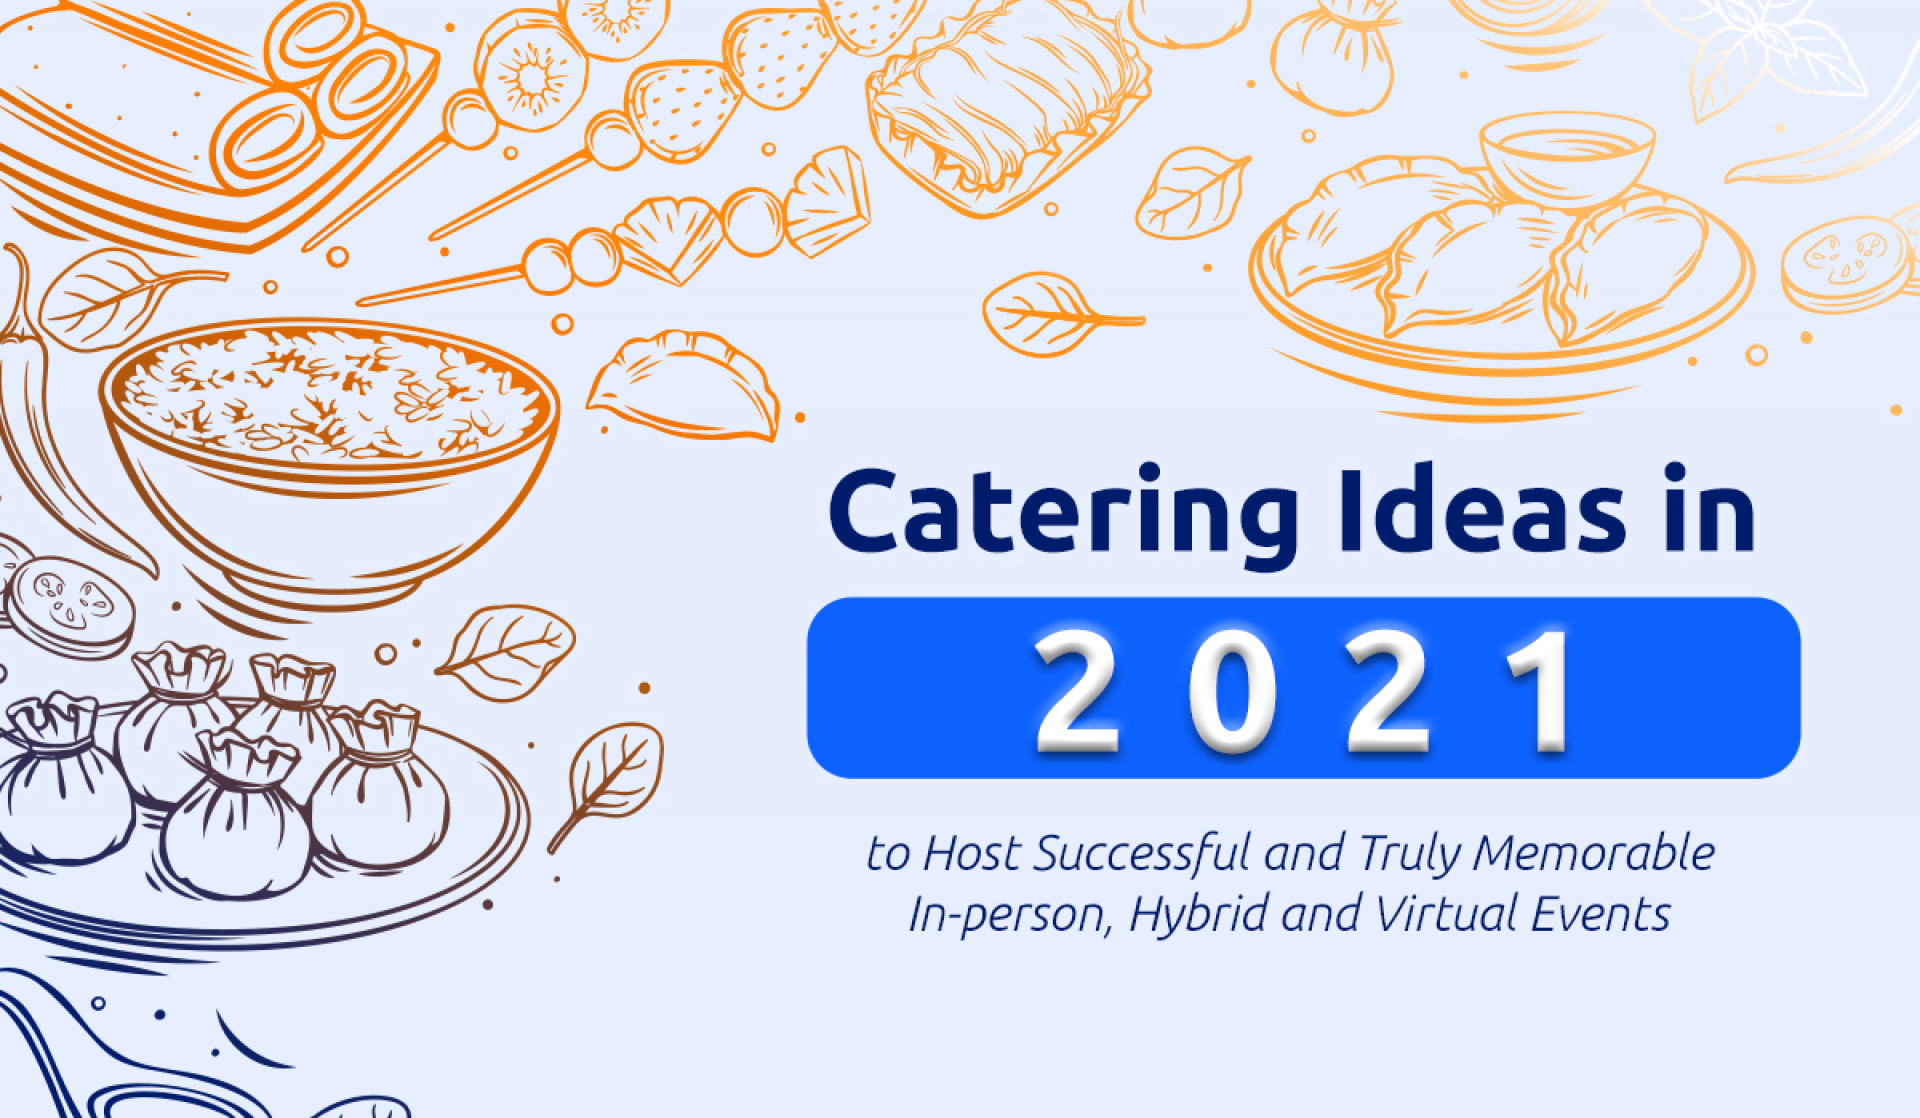 Catering Ideas in 2021 to Host Successful and Truly Memorable In-Person, Hybrid and Virtual Events